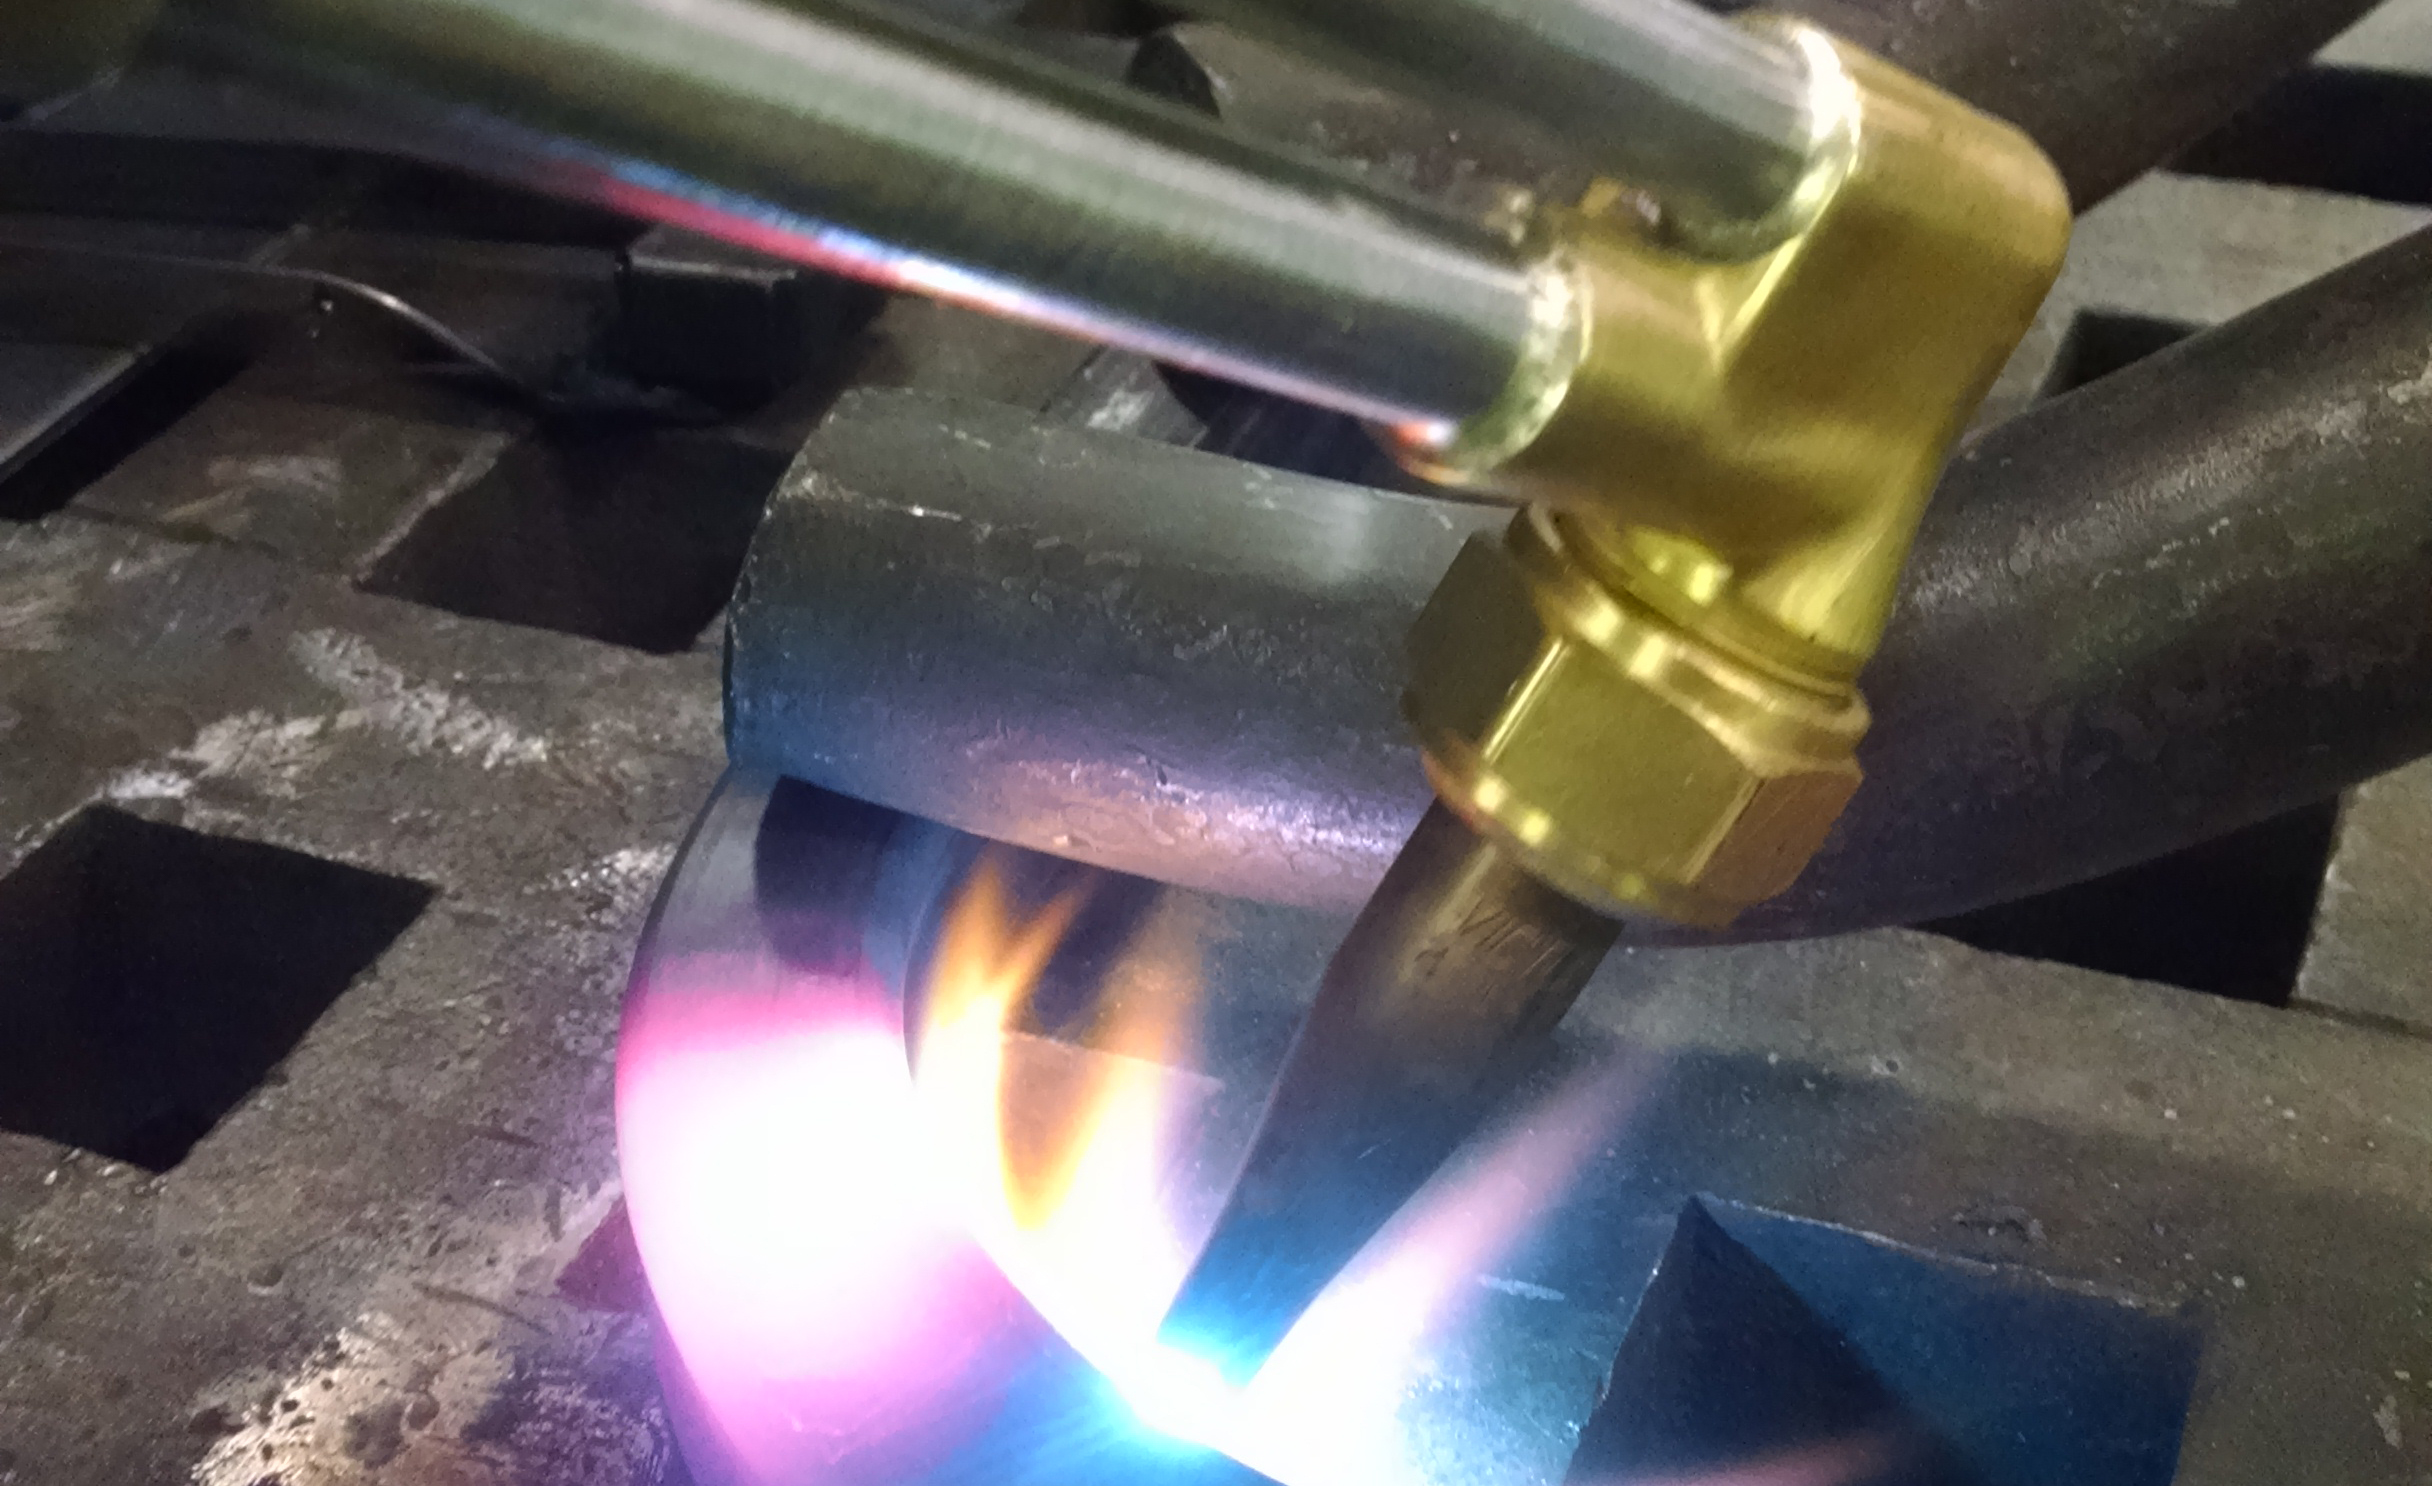 Close up of welding